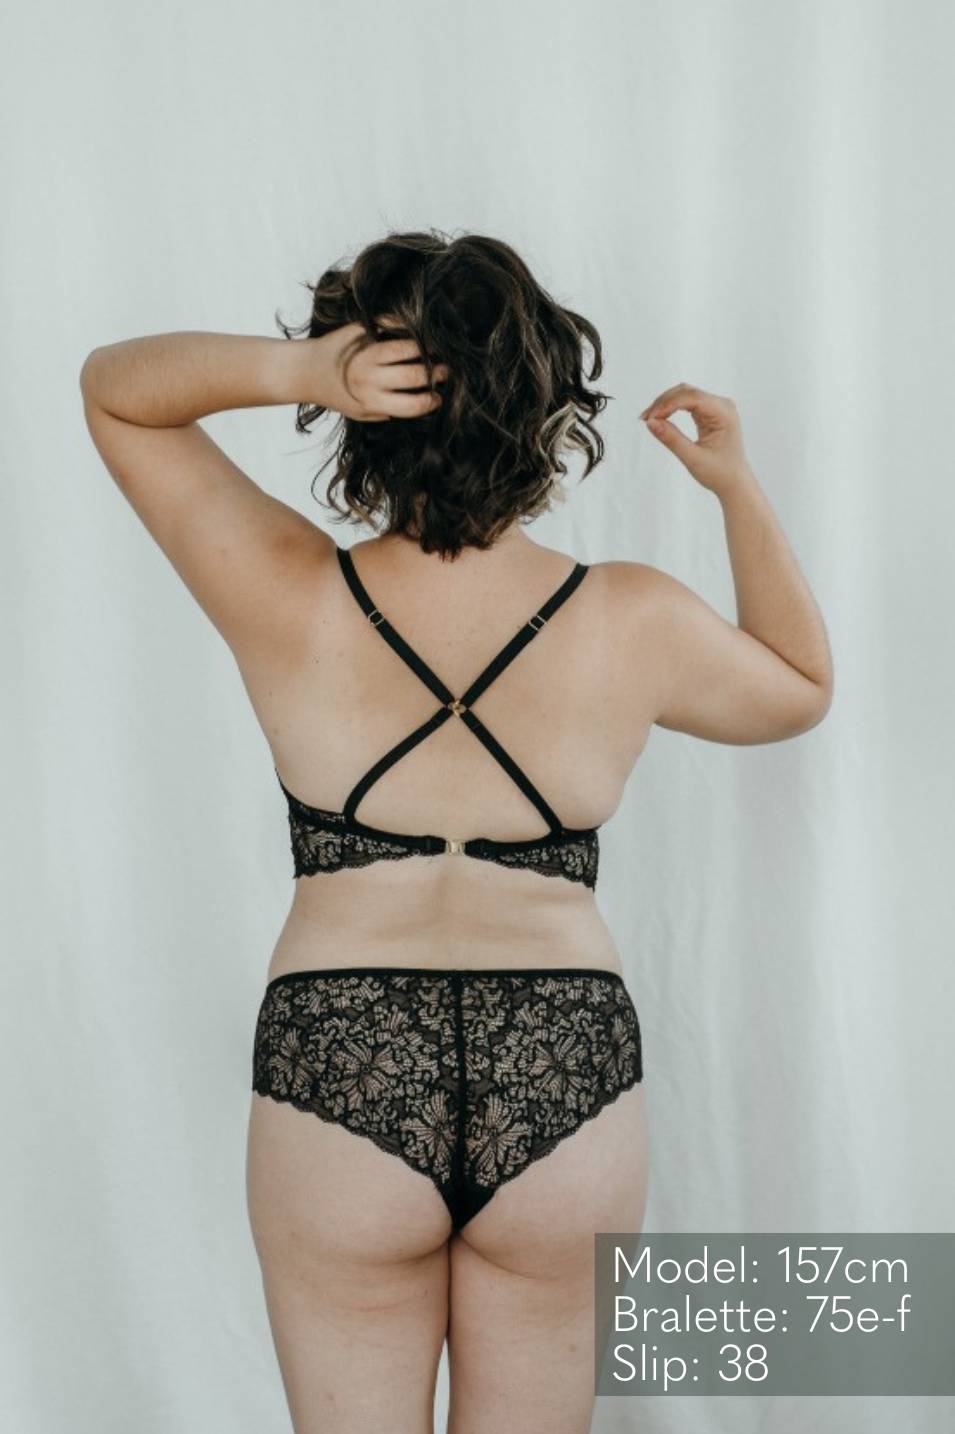 Bralette and slip Vivi from lace photographed from behind.